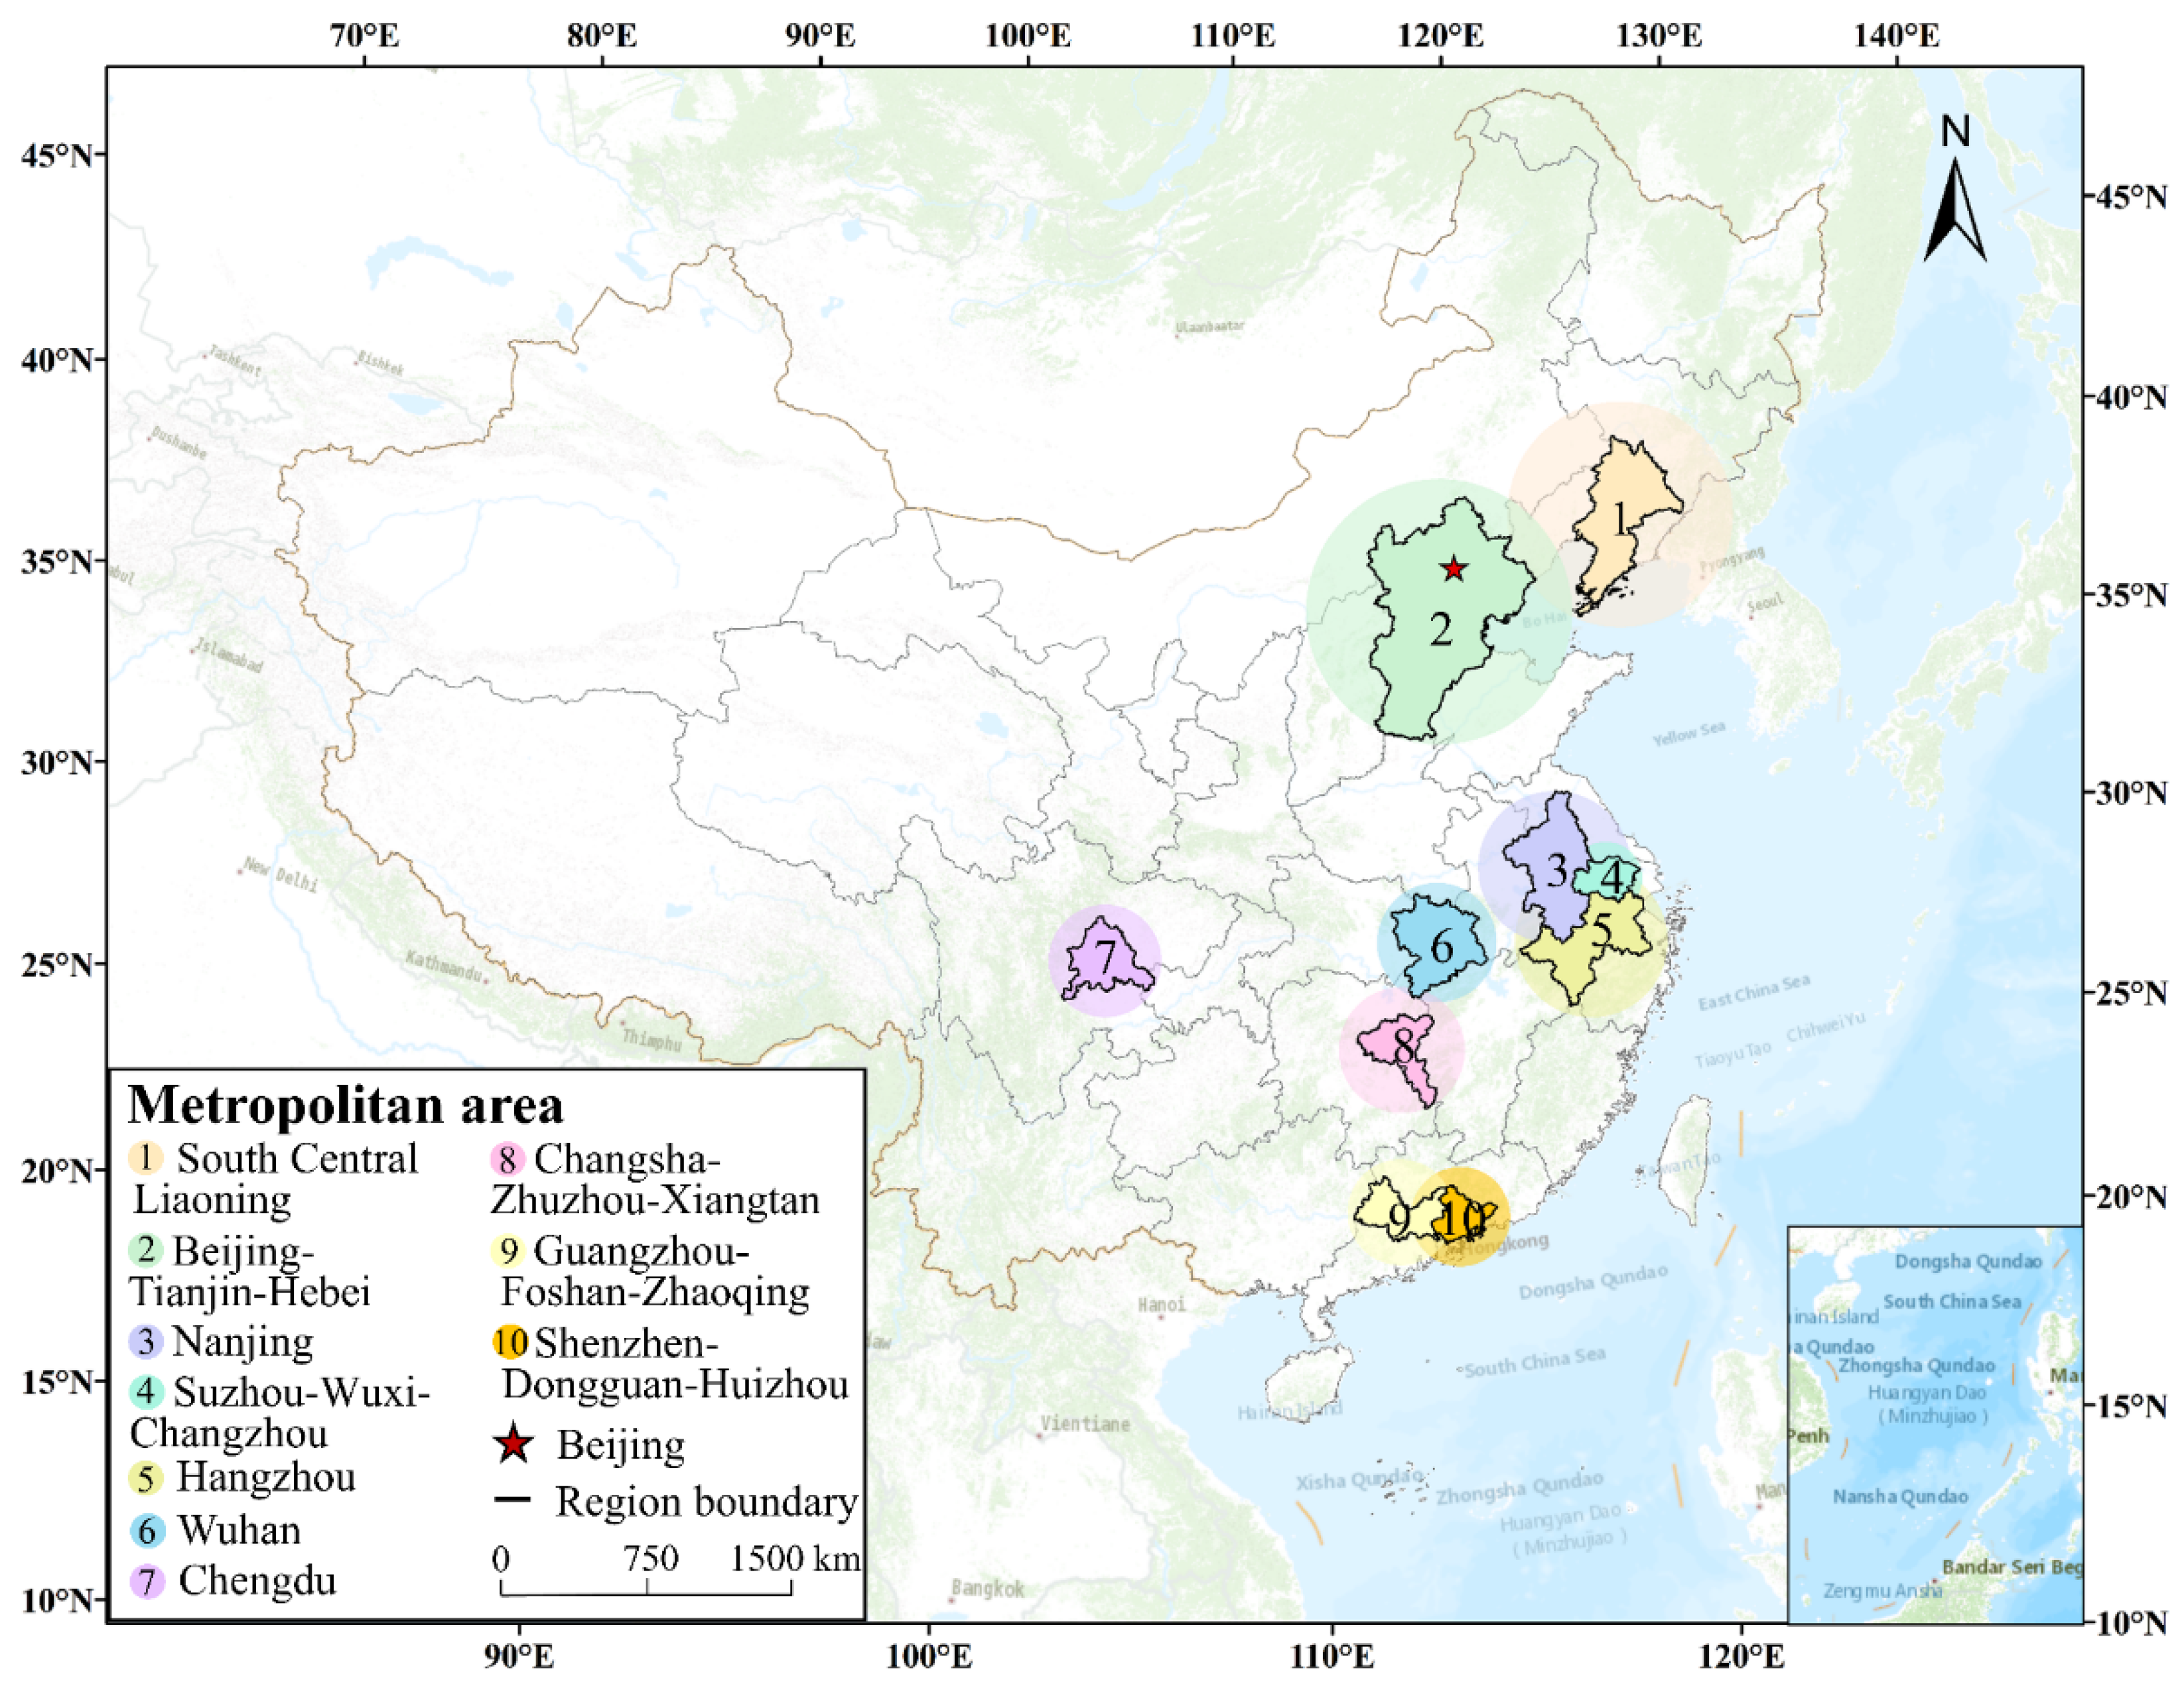 Ijgi Free Full Text Structural Differences Of Pm2 5 Spatial Correlation Networks In Ten Metropolitan Areas Of China Html